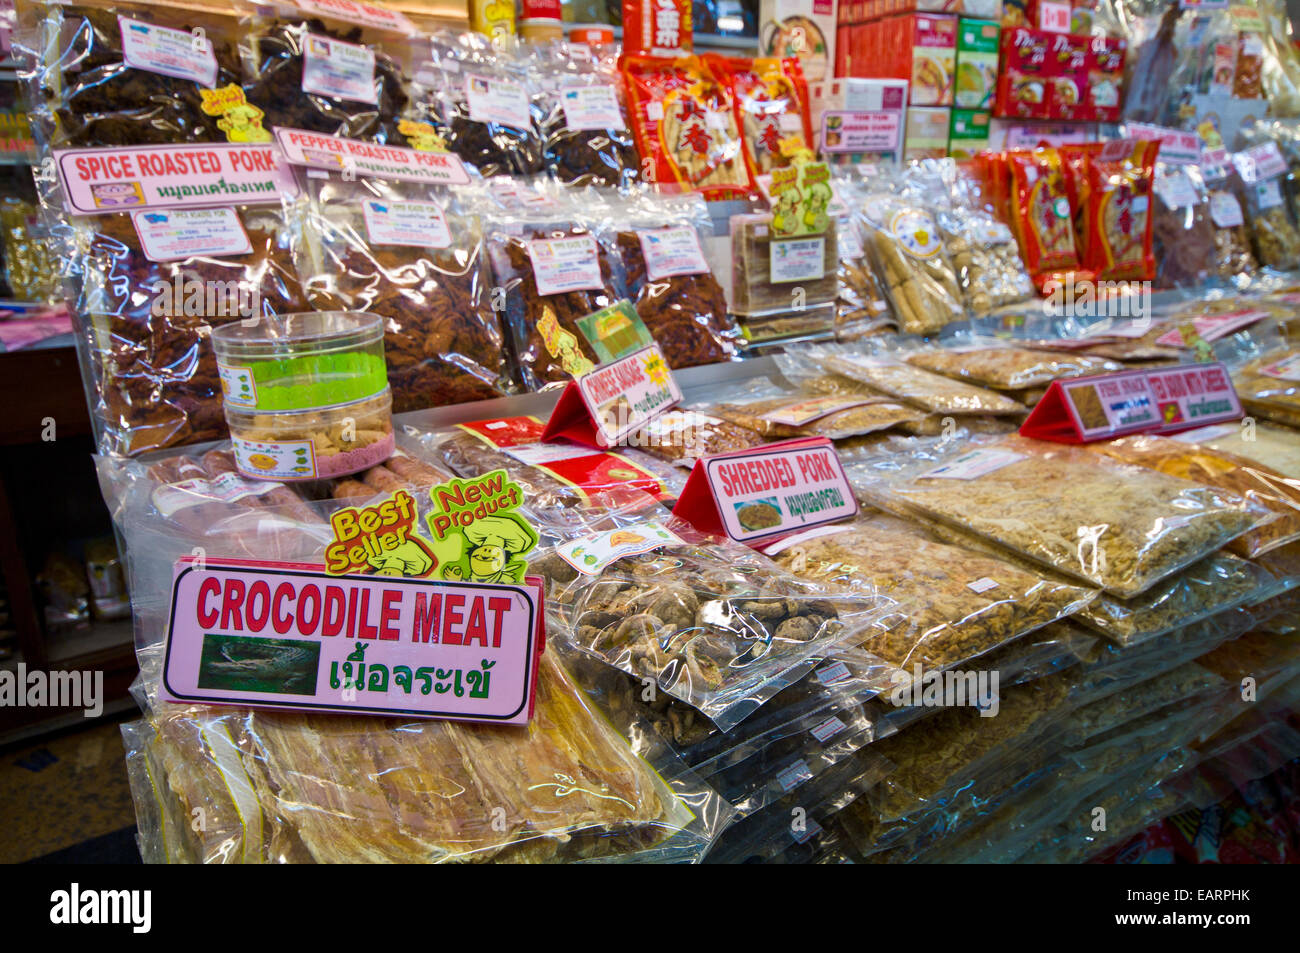 Crocodile meat and dried goods for sale in a shopping mall food court. Stock Photo